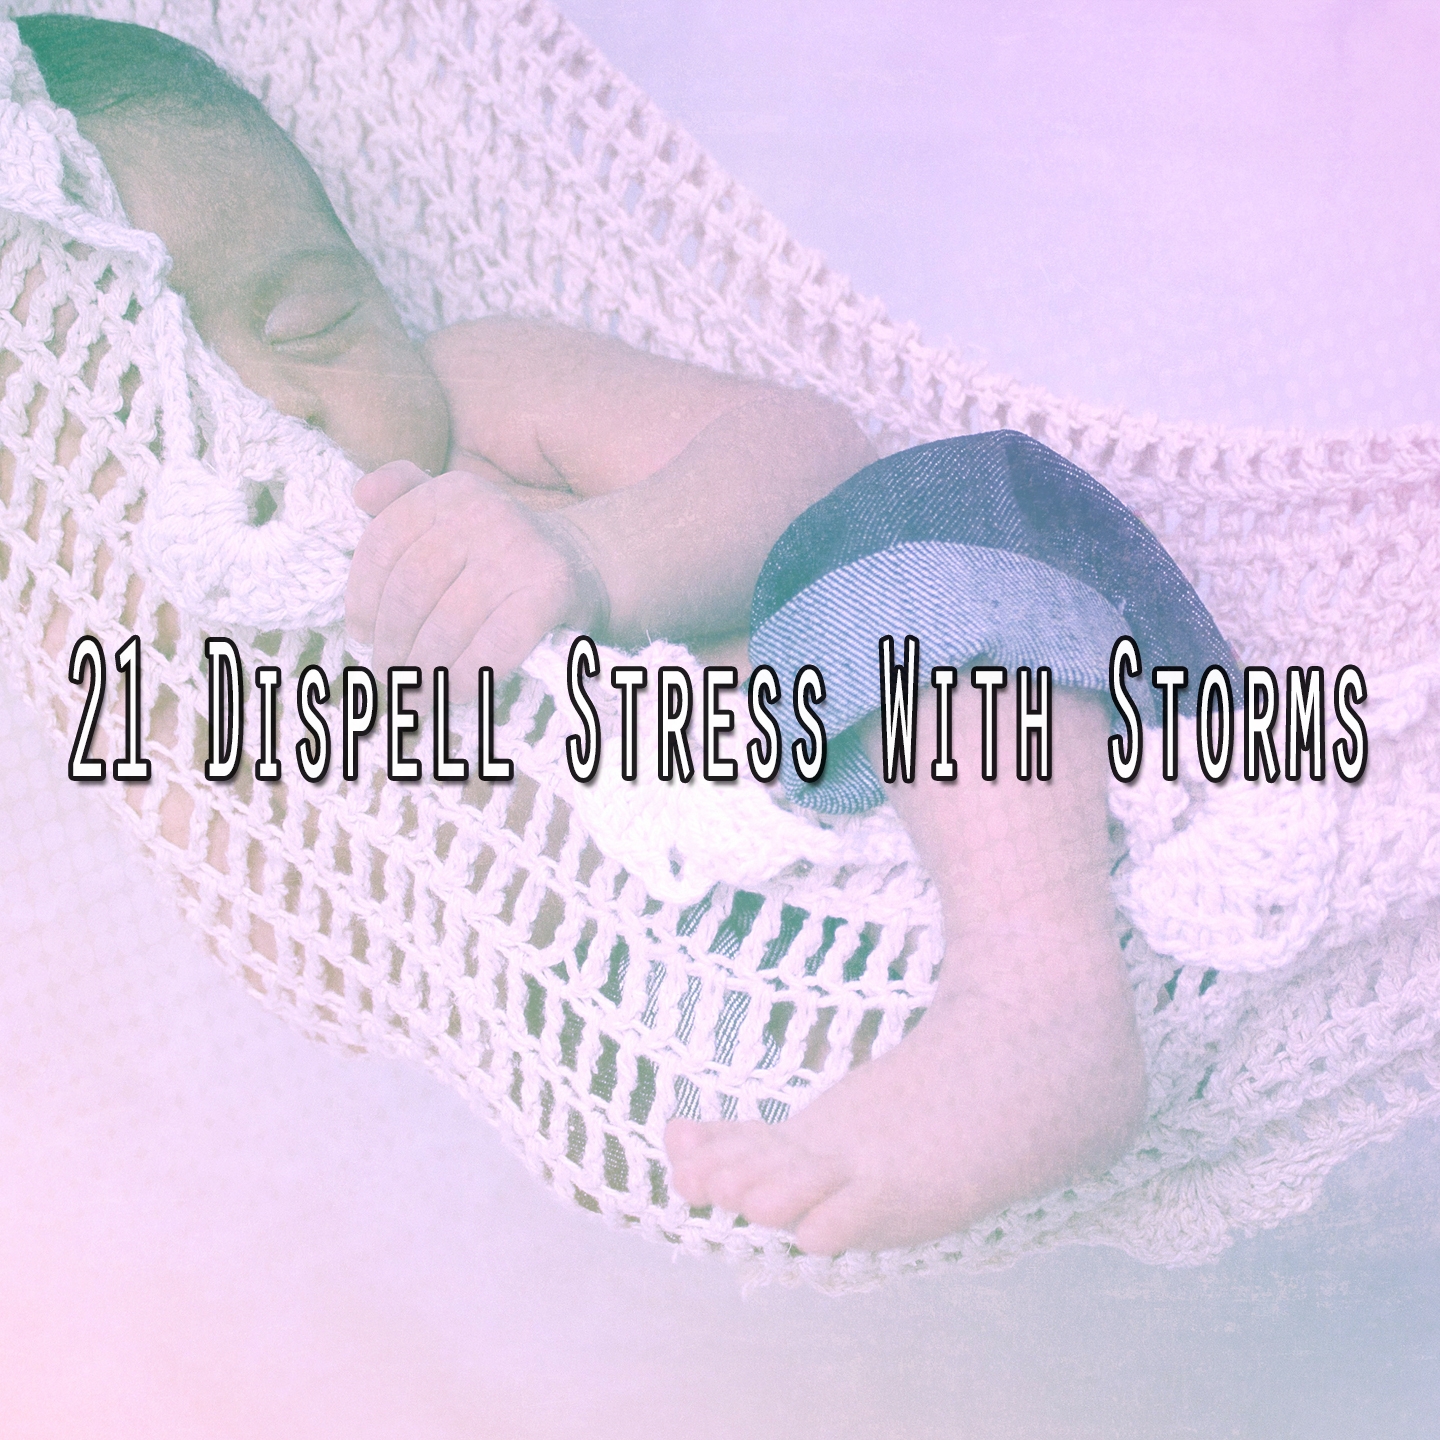 21 Dispell Stress With Storms